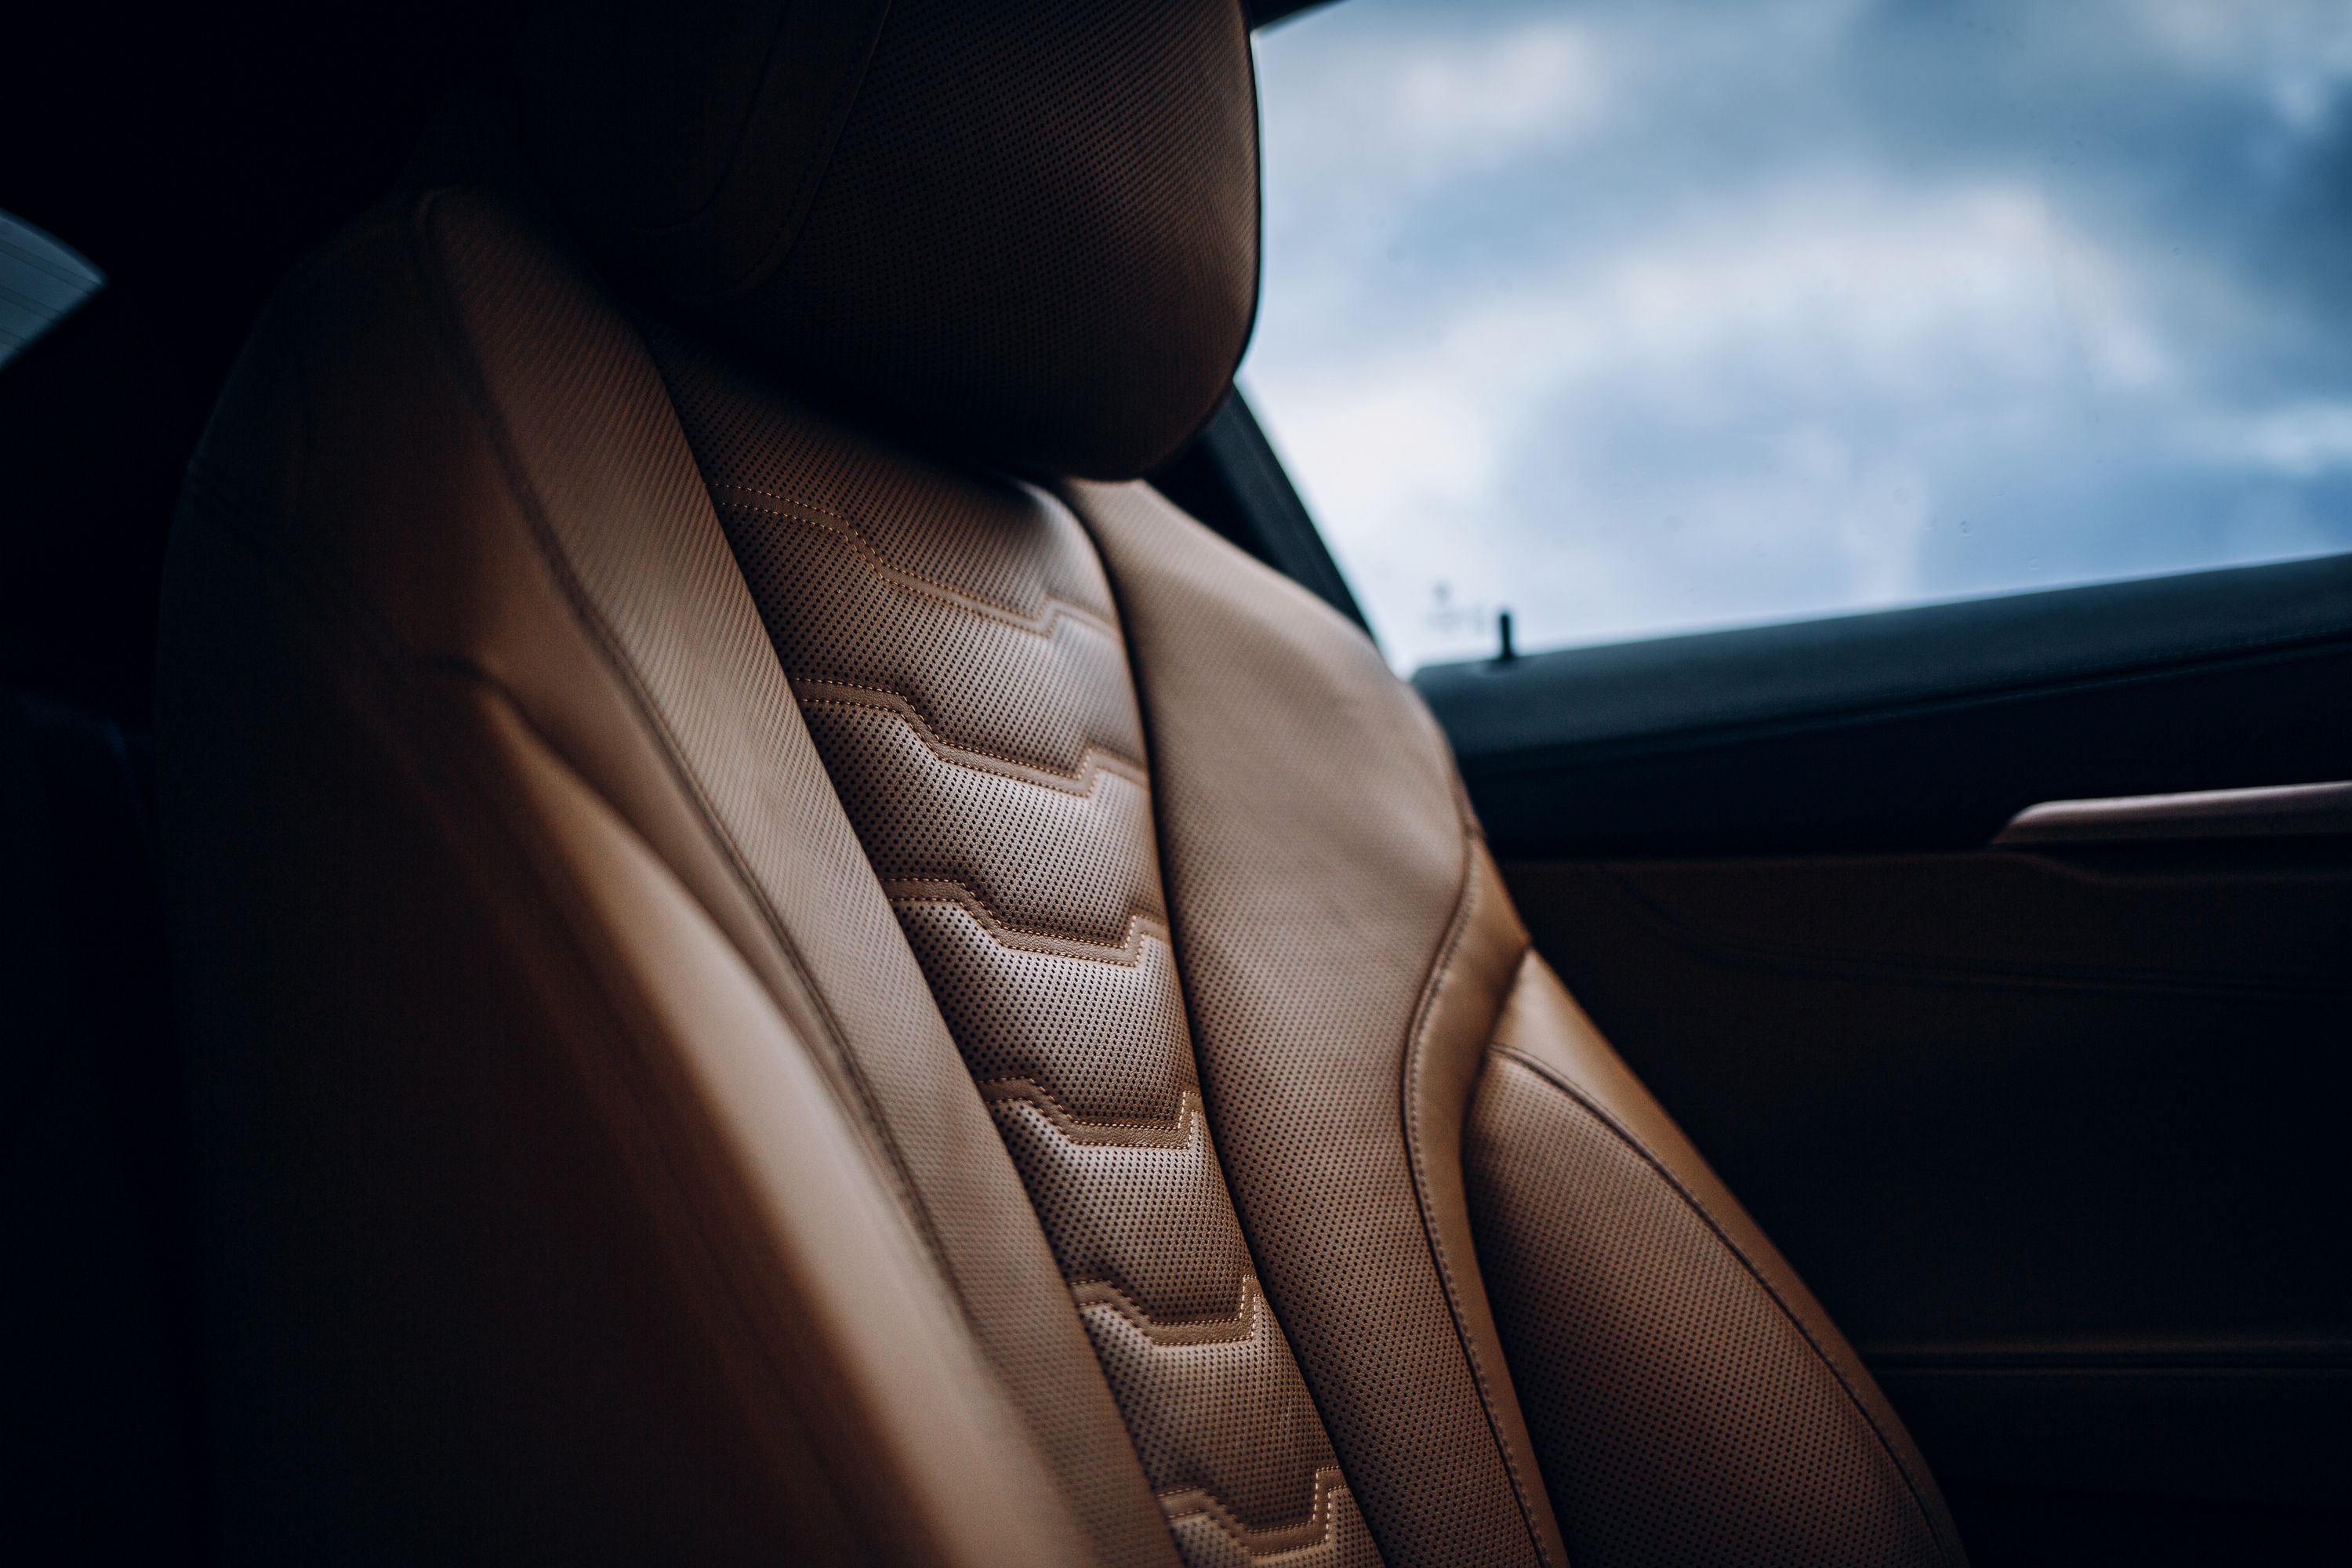 https://hips.hearstapps.com/hmg-prod/images/close-up-of-vehicle-seat-in-car-royalty-free-image-1639850703.jpg